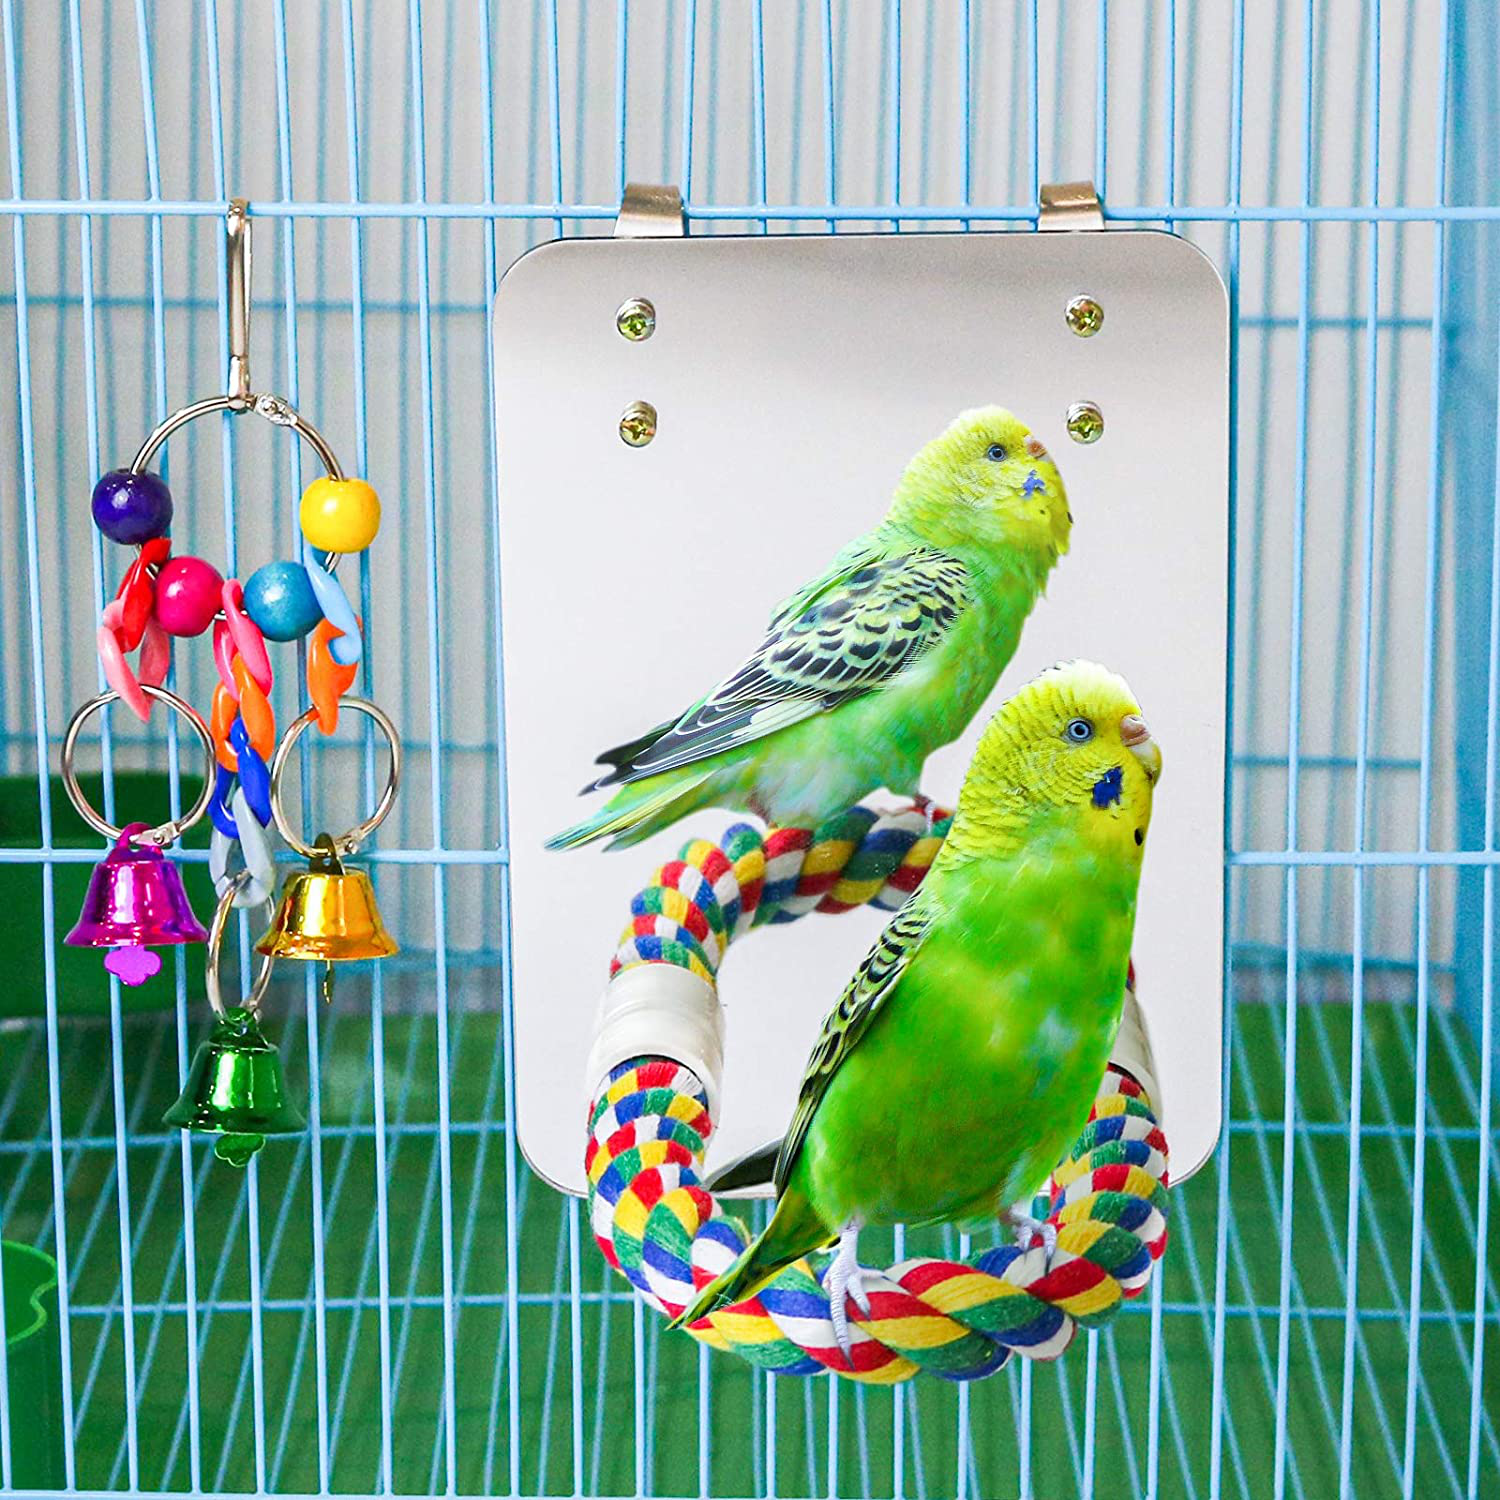 Suruikei 7 Inch Bird Mirror with Rope Perch Cockatiel Mirror Parrot Swing Toys Parrot Cage Toys for Parakeet Cockatoo Cockatiel Conure Lovebirds Finch Canaries